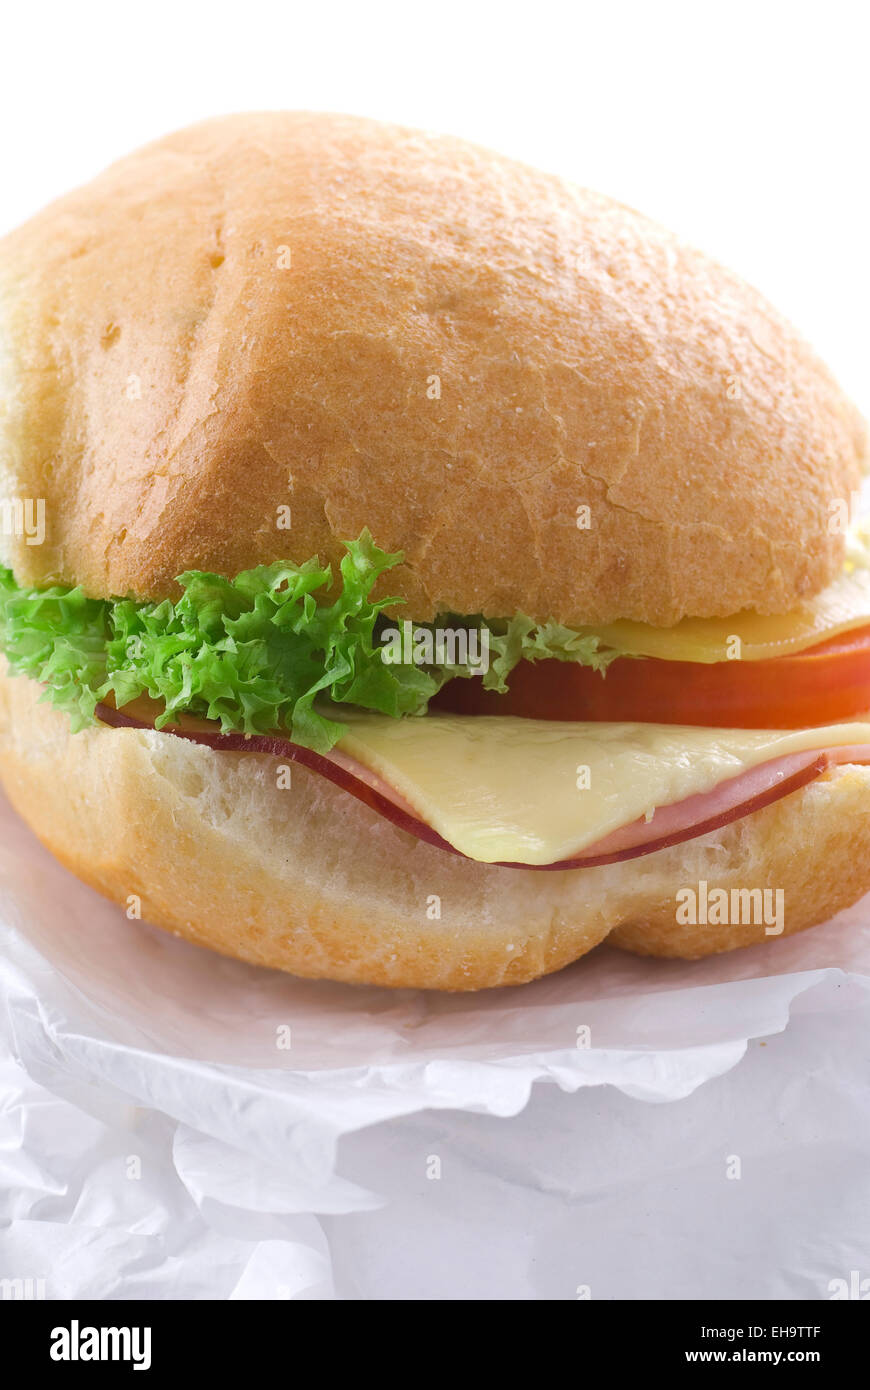 Ham and cheese sandwich on greaseproof paper. Stock Photo